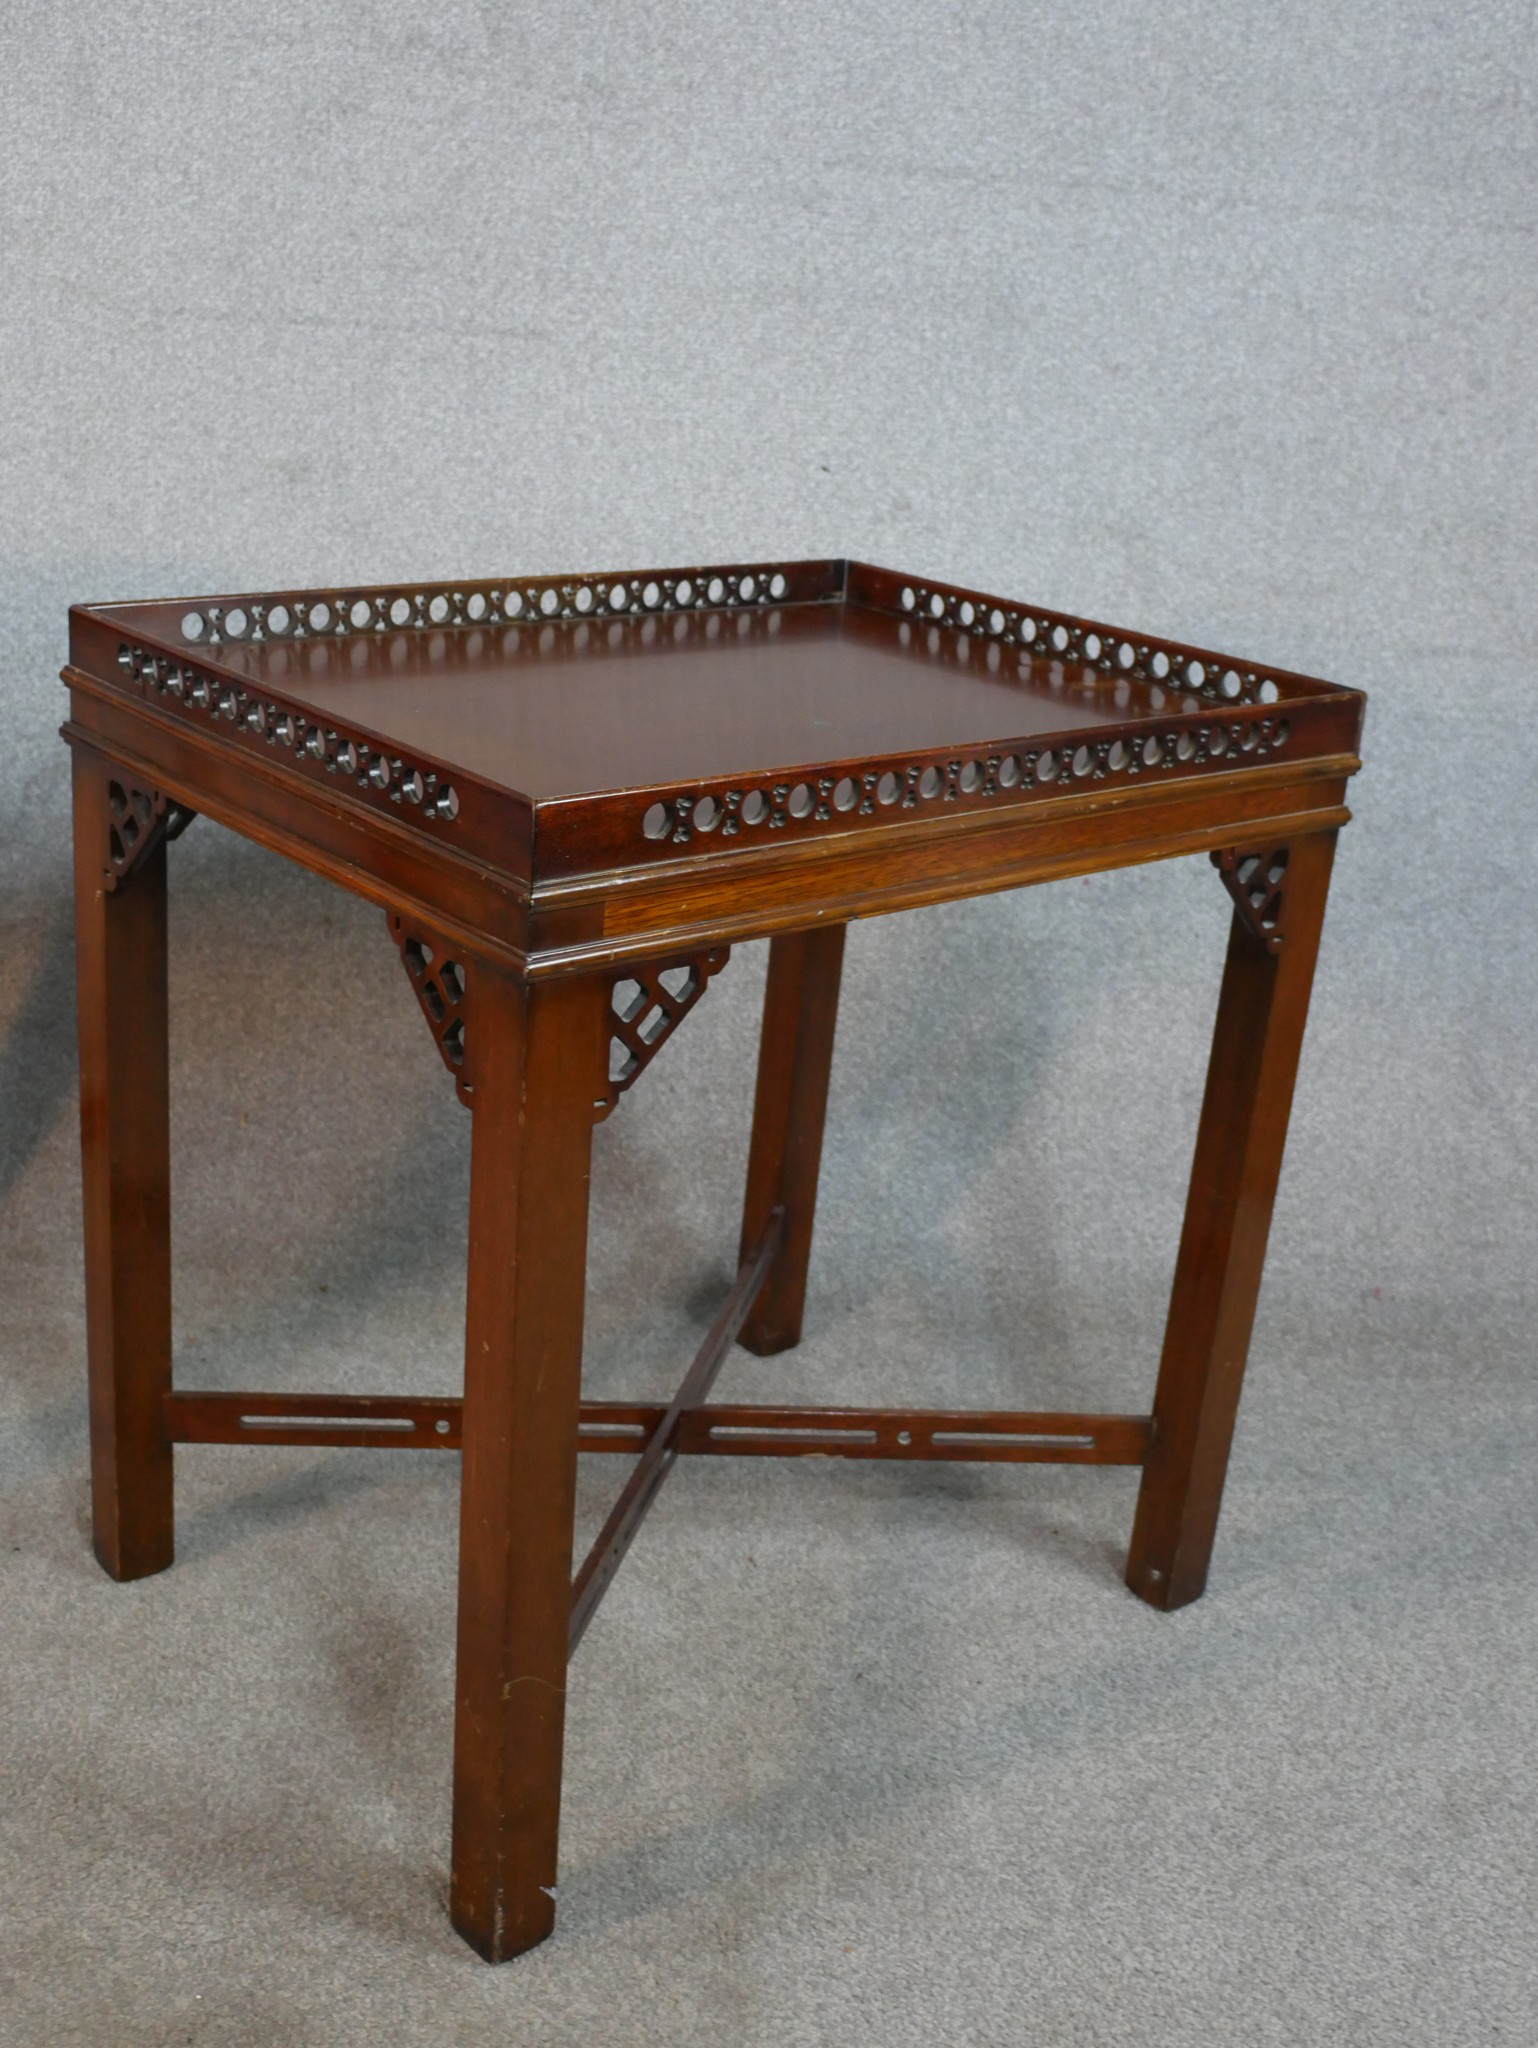 A pair of reporoduction mahogany lamp tables in Chippendale style, of rectangular form with a - Image 6 of 7